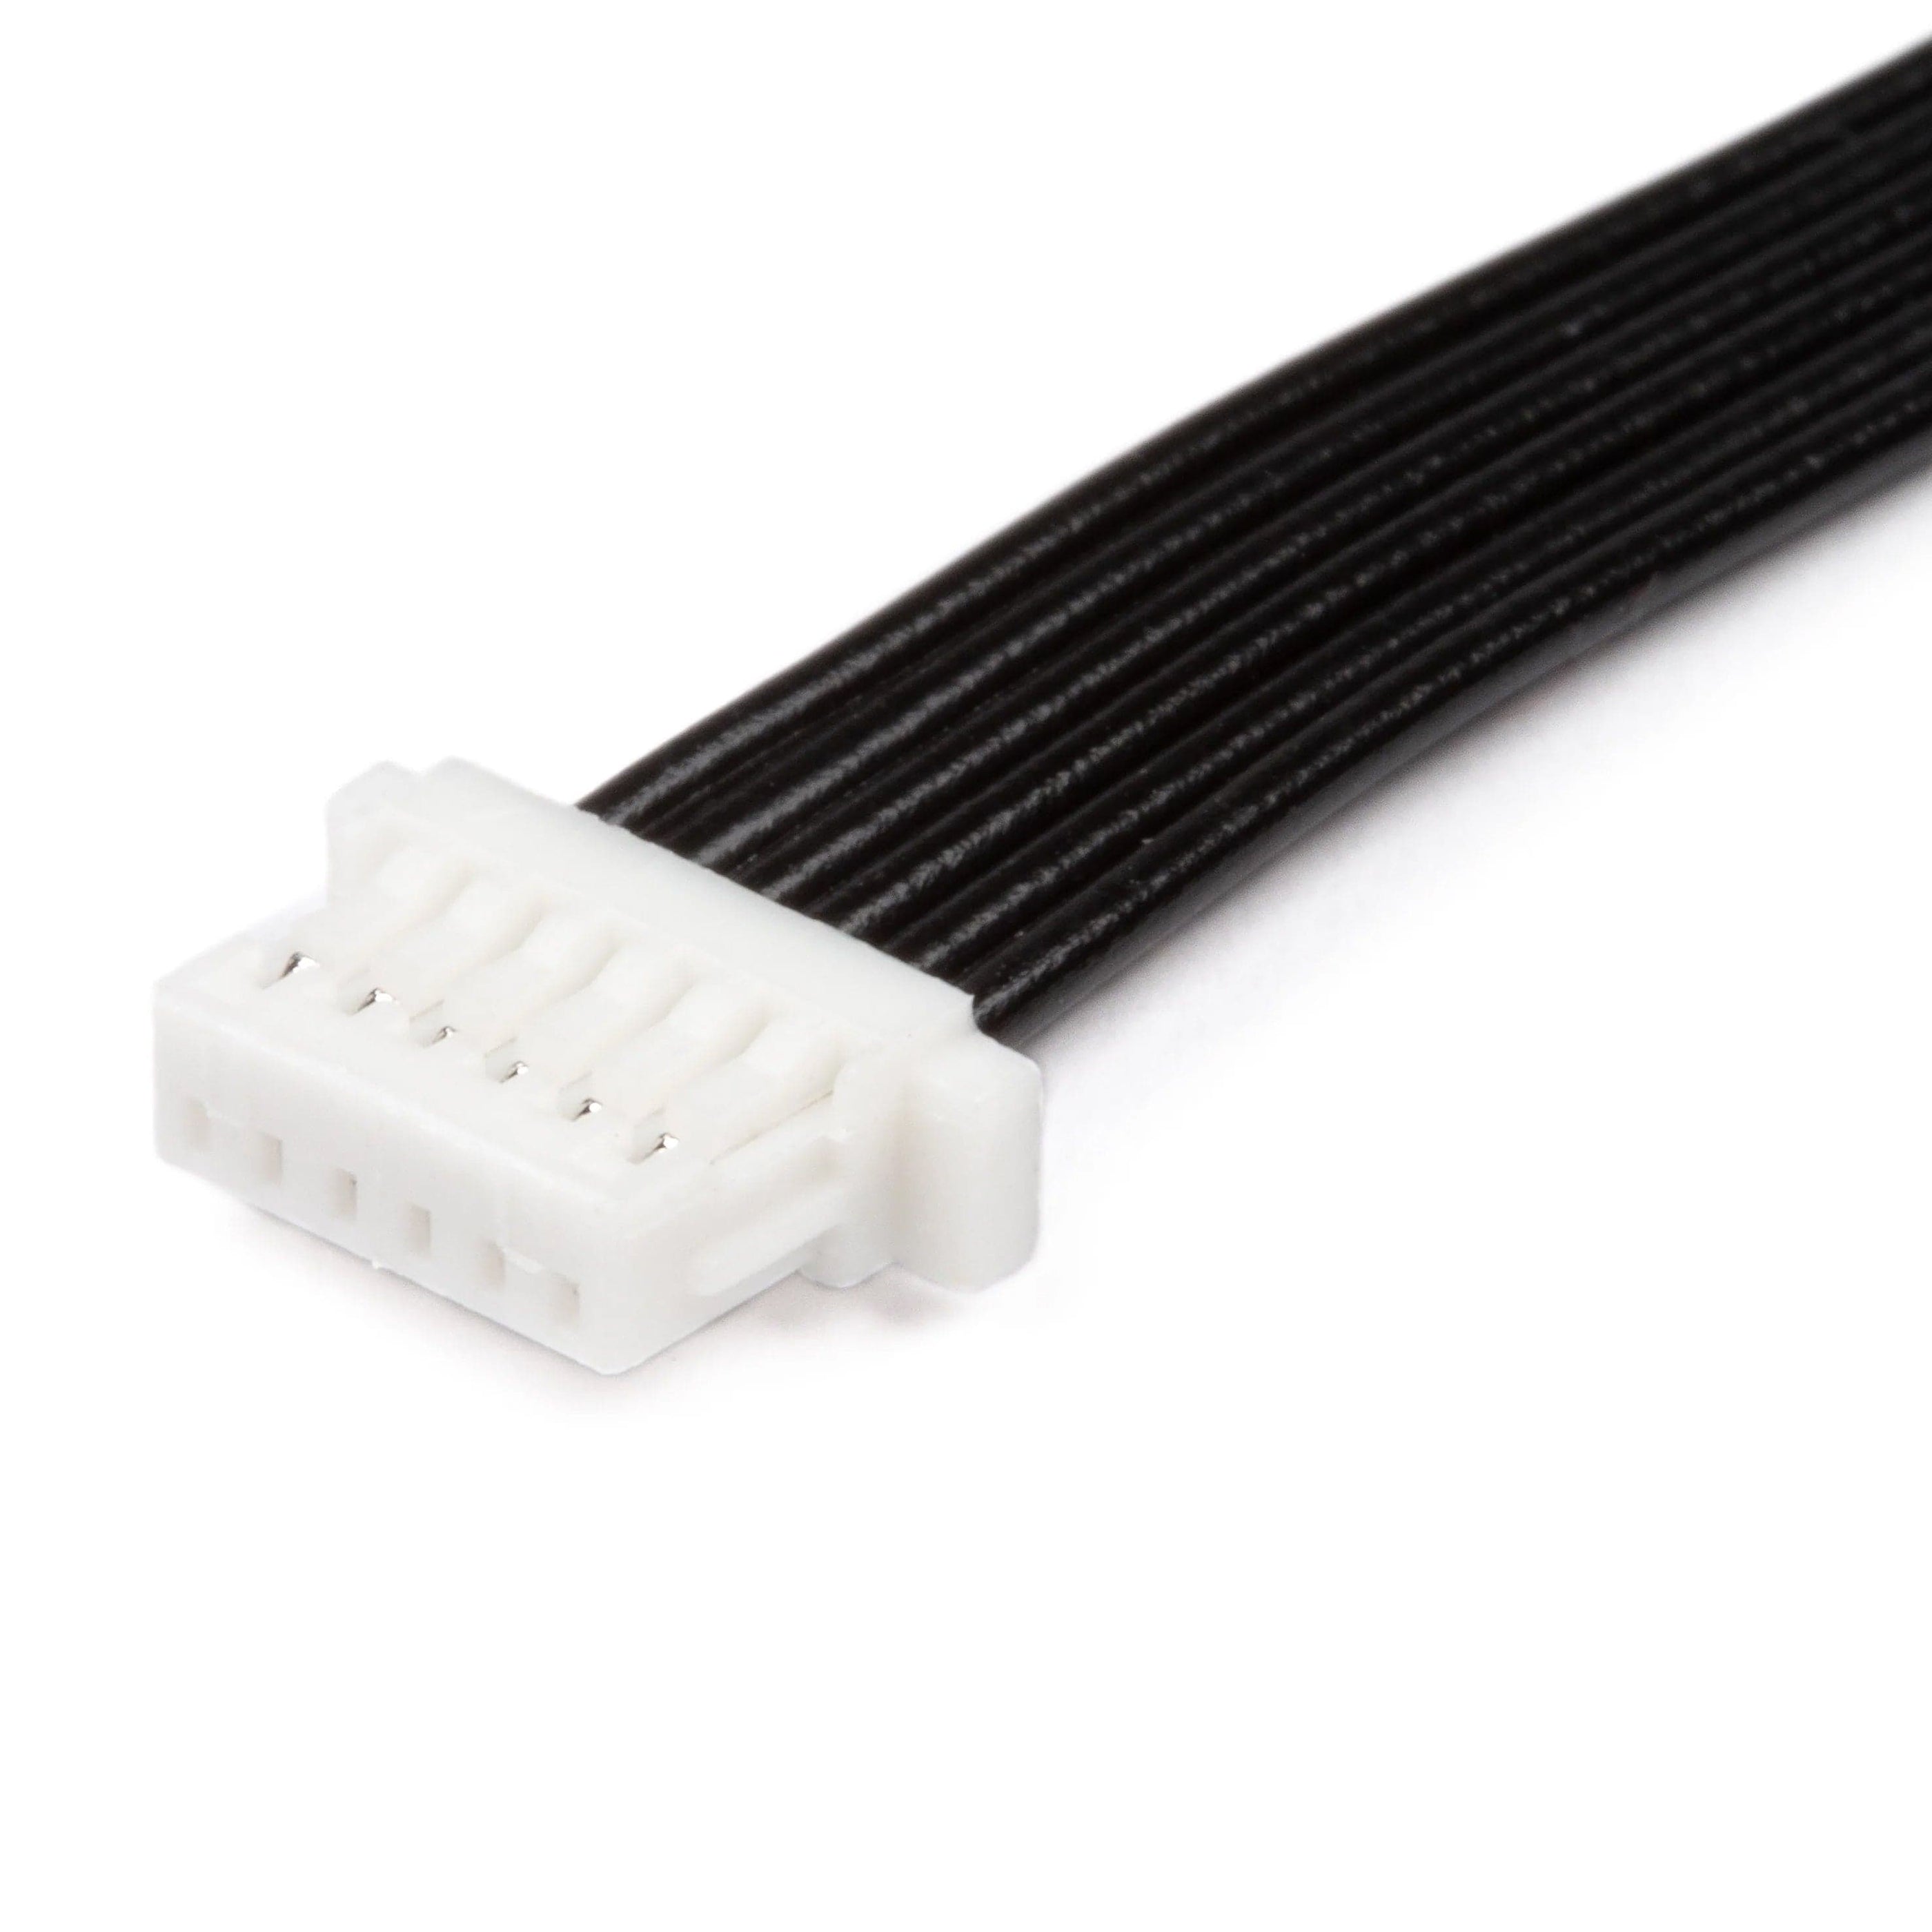 JST-SH cable - 6 pin (pack of 4) - The Pi Hut